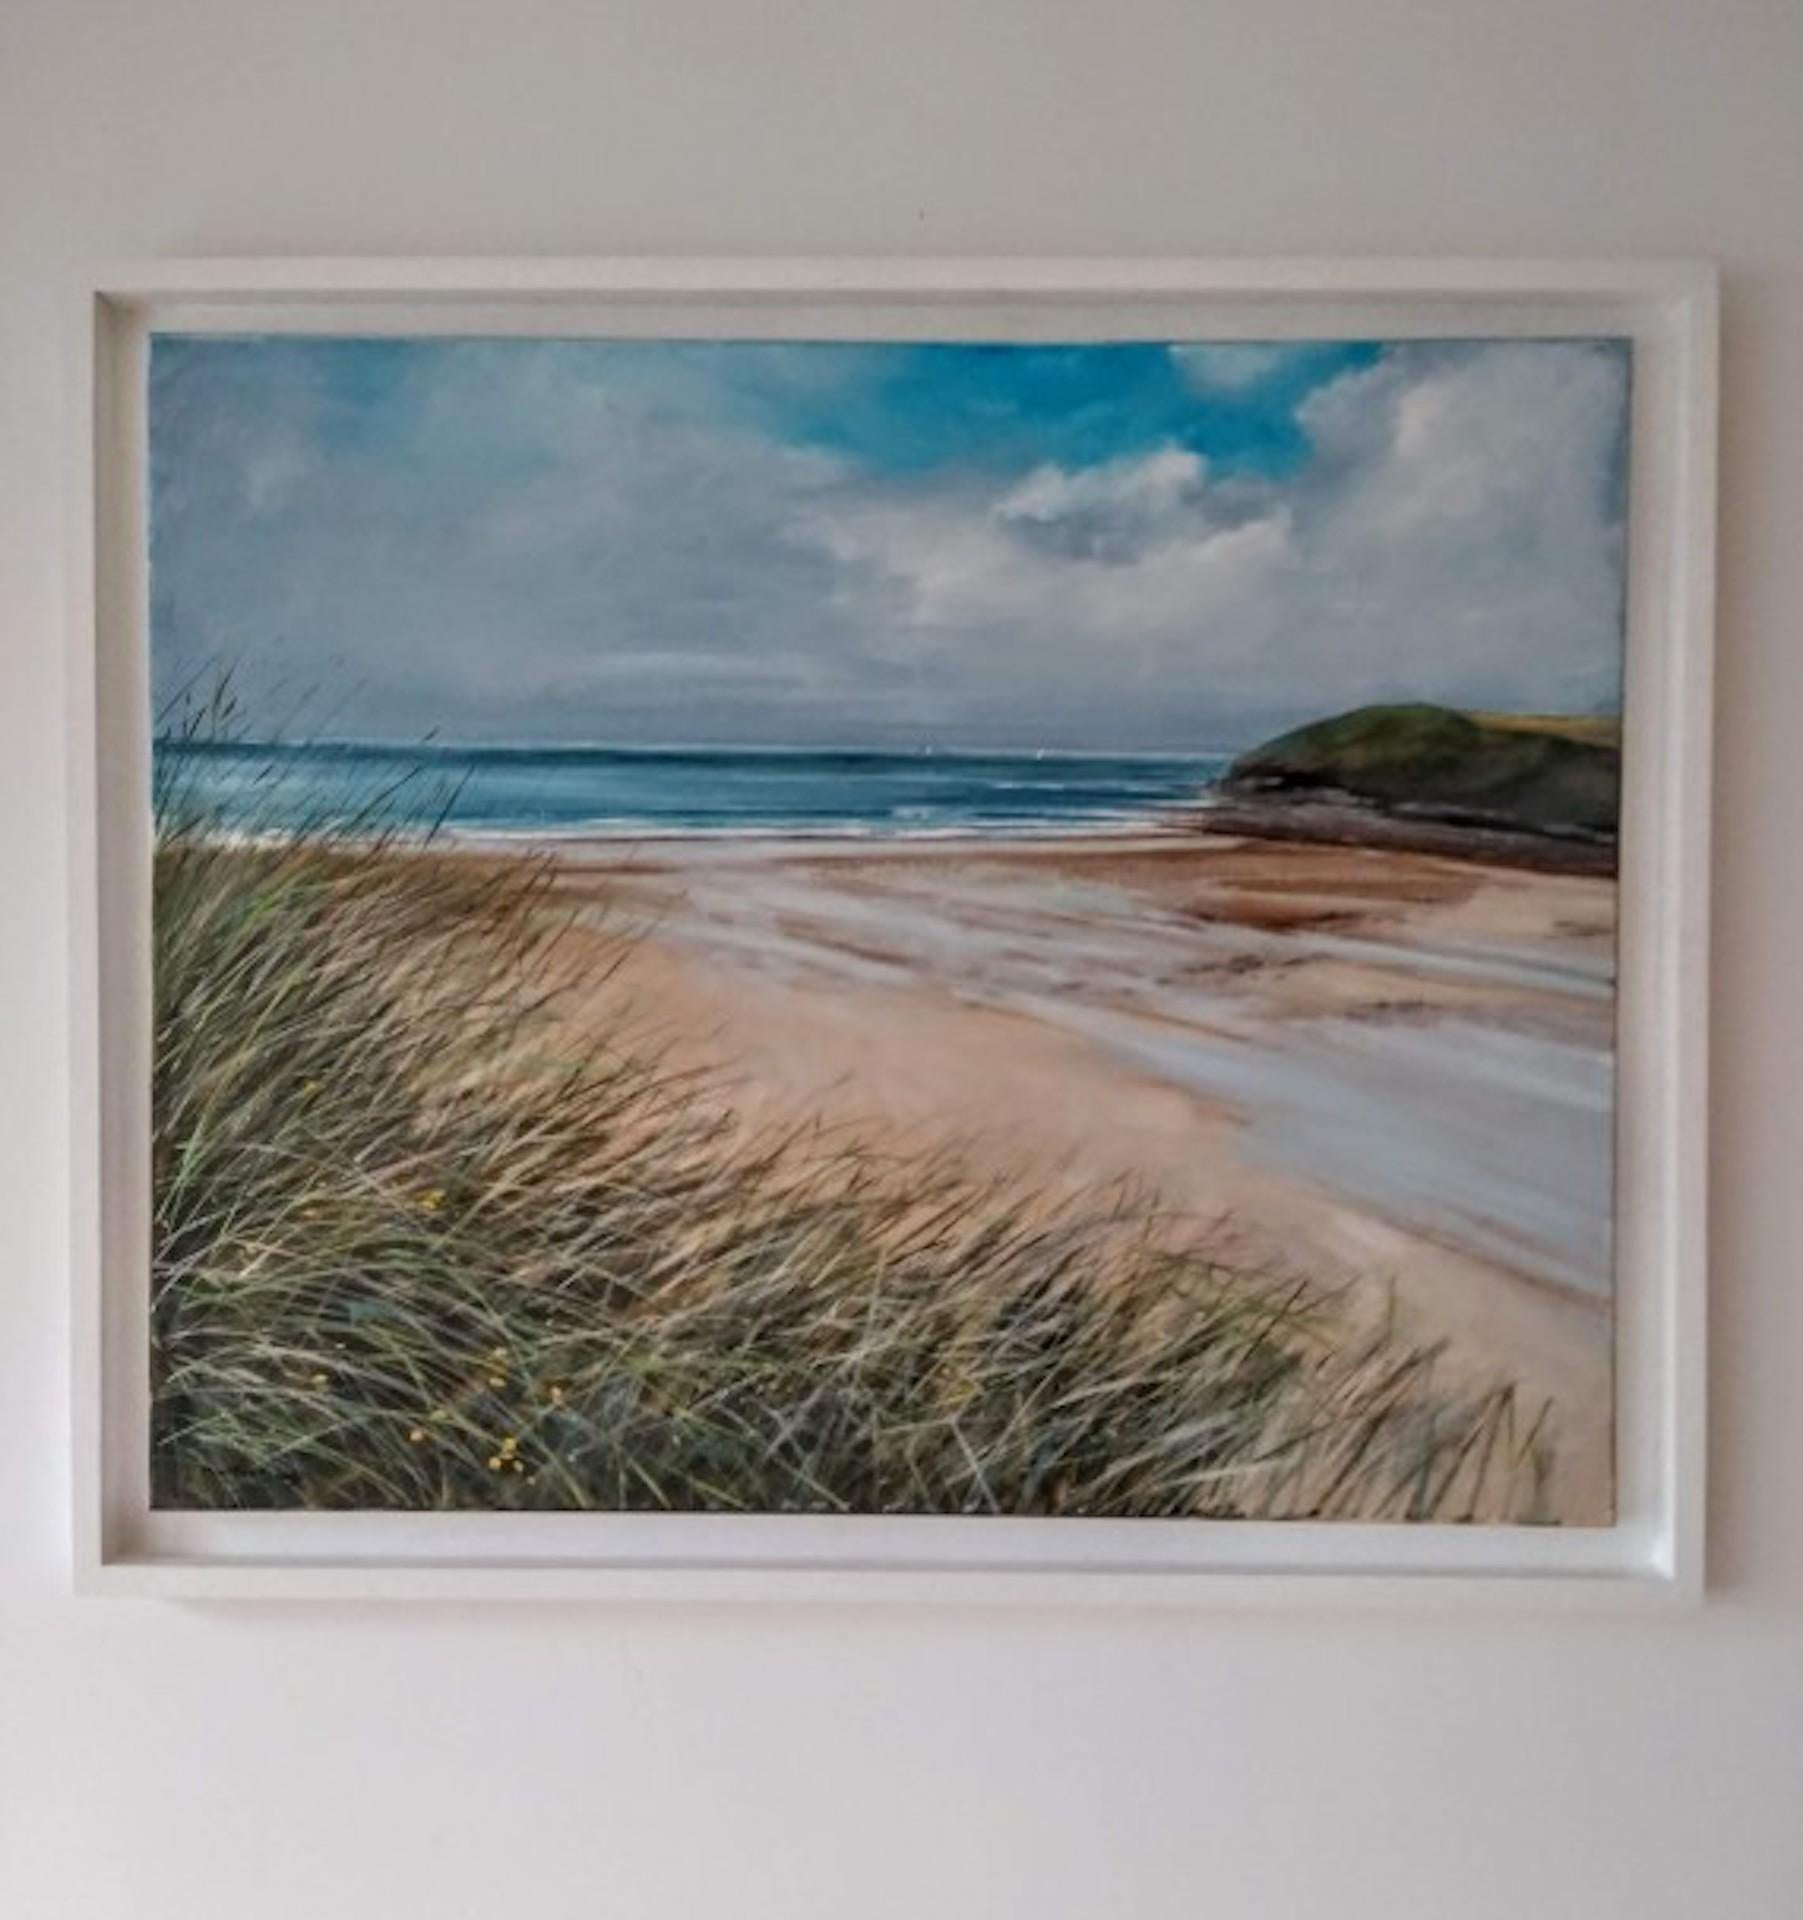 Through The Dune Grass [2020]
Original
Landscapes and seascapes
Oil on canvas
Complete Size of Unframed Work: H:61 cm x W:76 cm x D:2cm
Frame Size: H:69 cm x W:84 cm x D:3cm
Sold Framed
Please note that insitu images are purely an indication of how